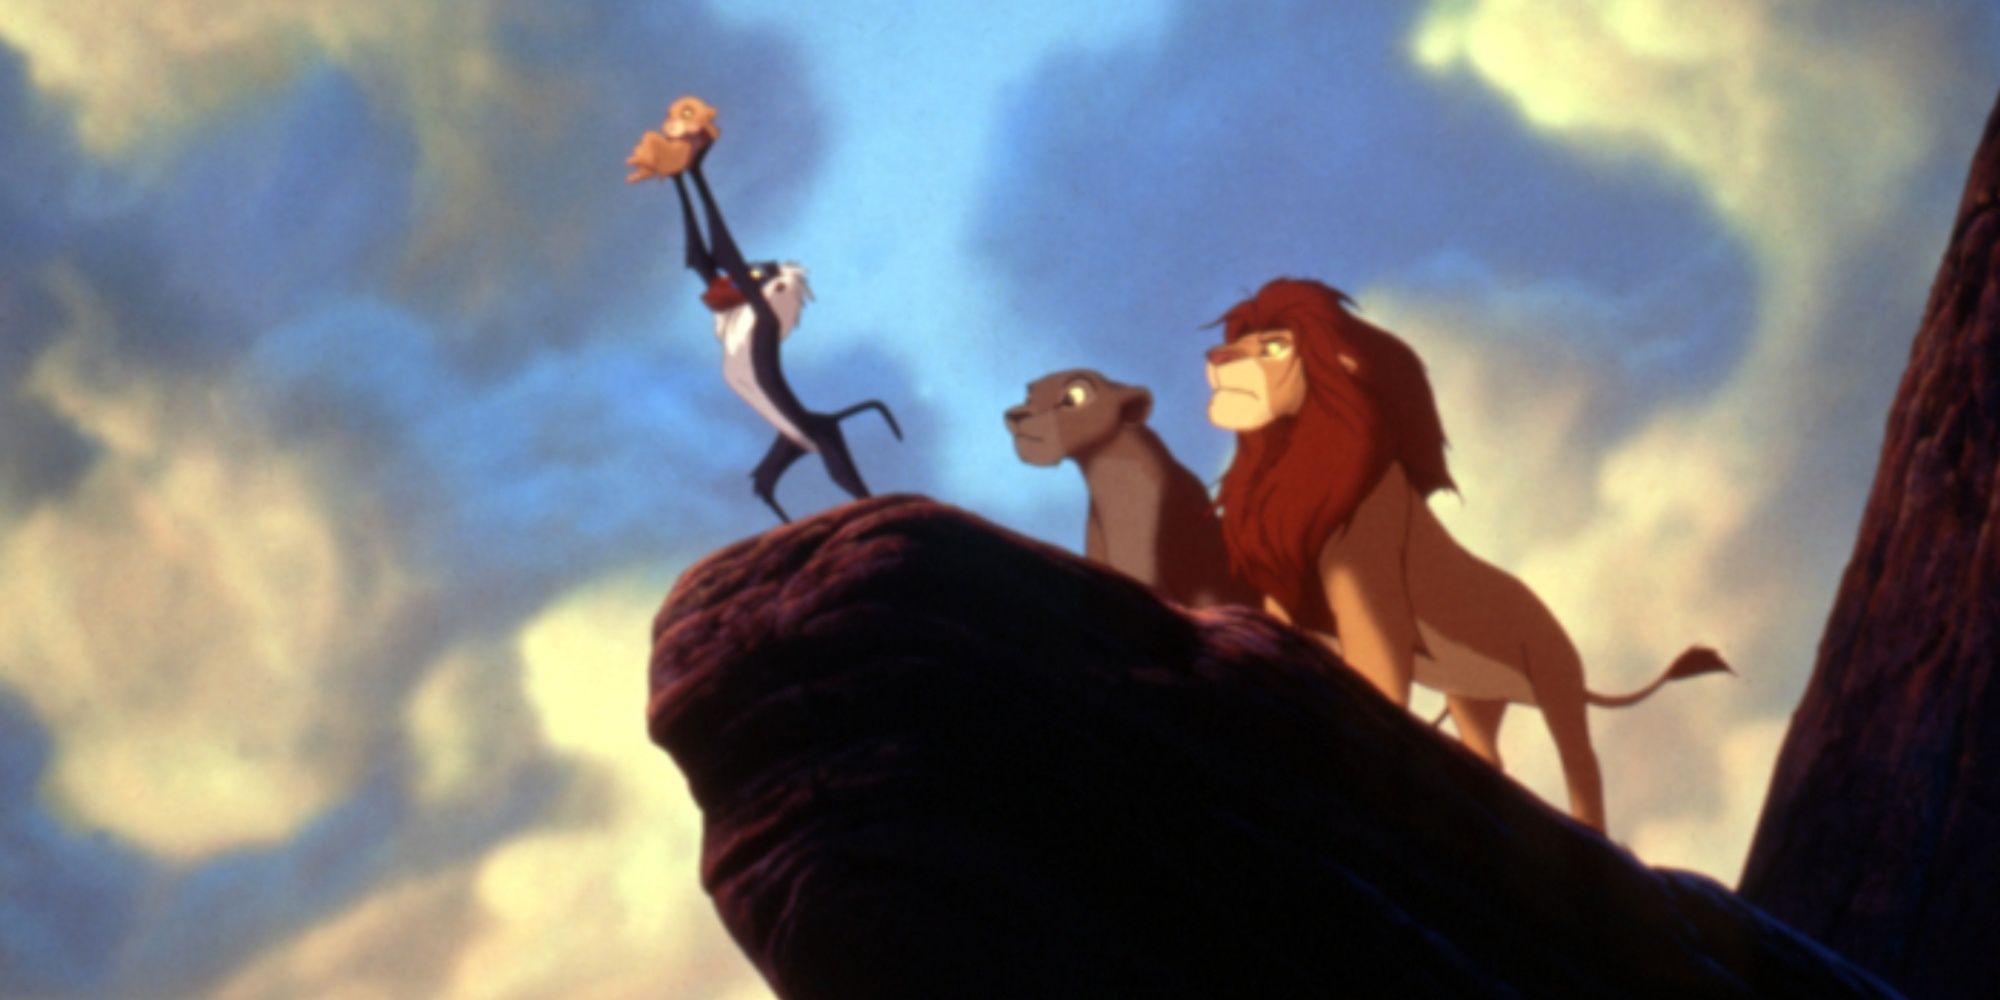 The Circle Of Life - The Lion King comes rock screenshot cropped